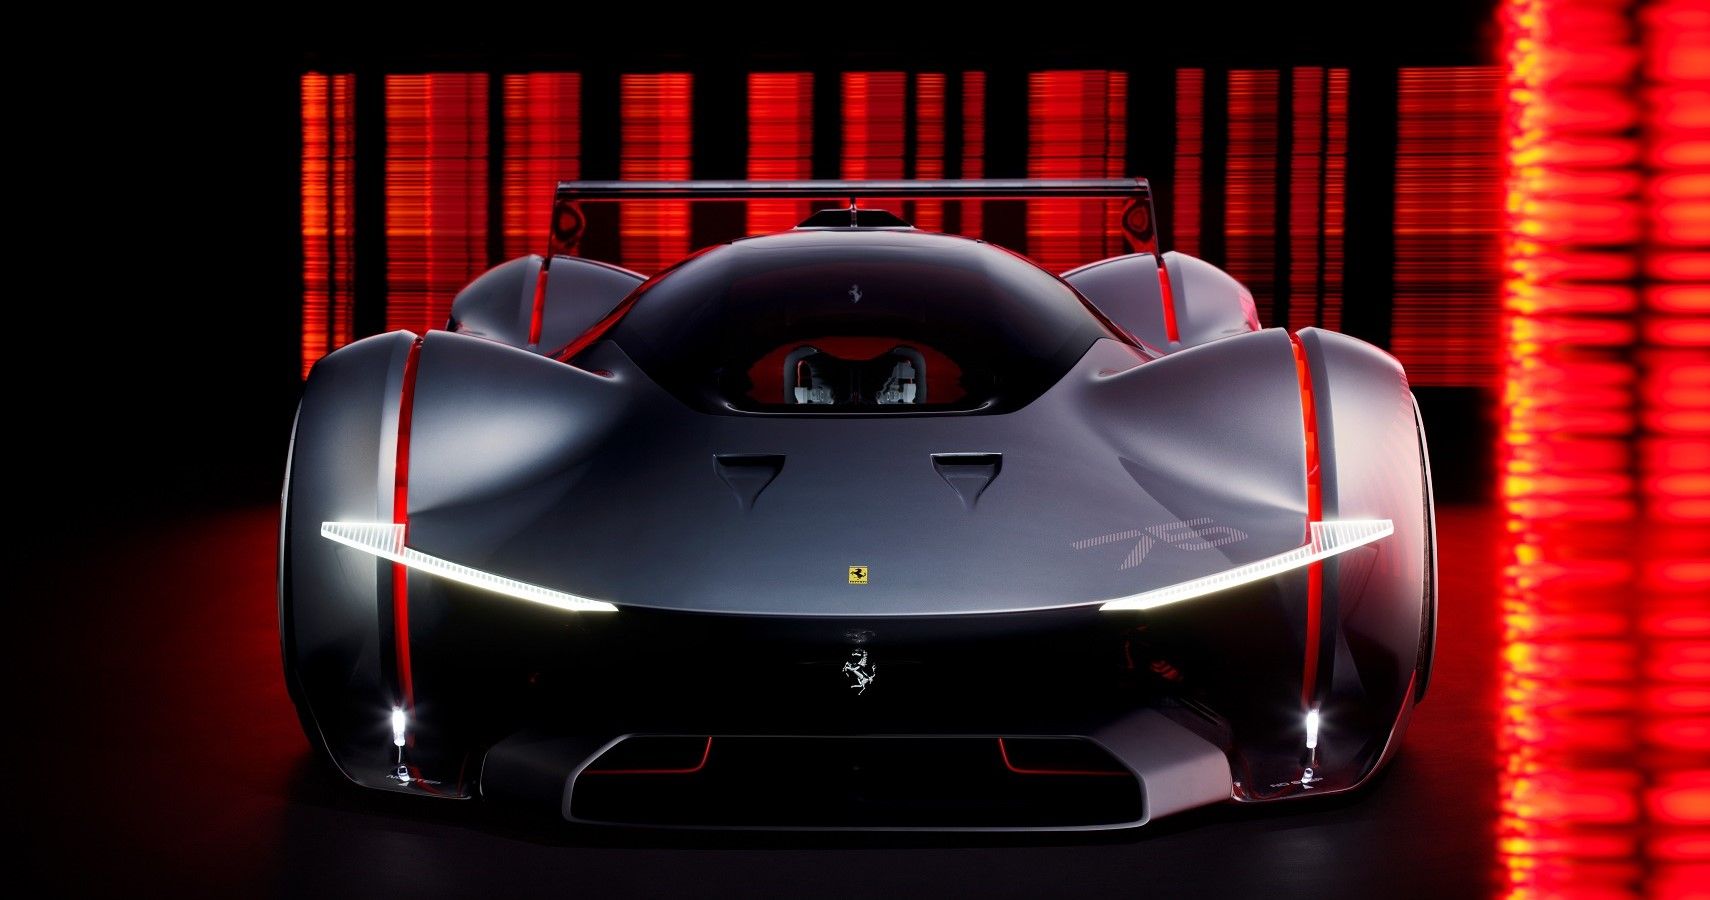 Ferrari Reveals The Powerful Vision Gran Turismo Hybrid And Shows Off Its Awesome Design